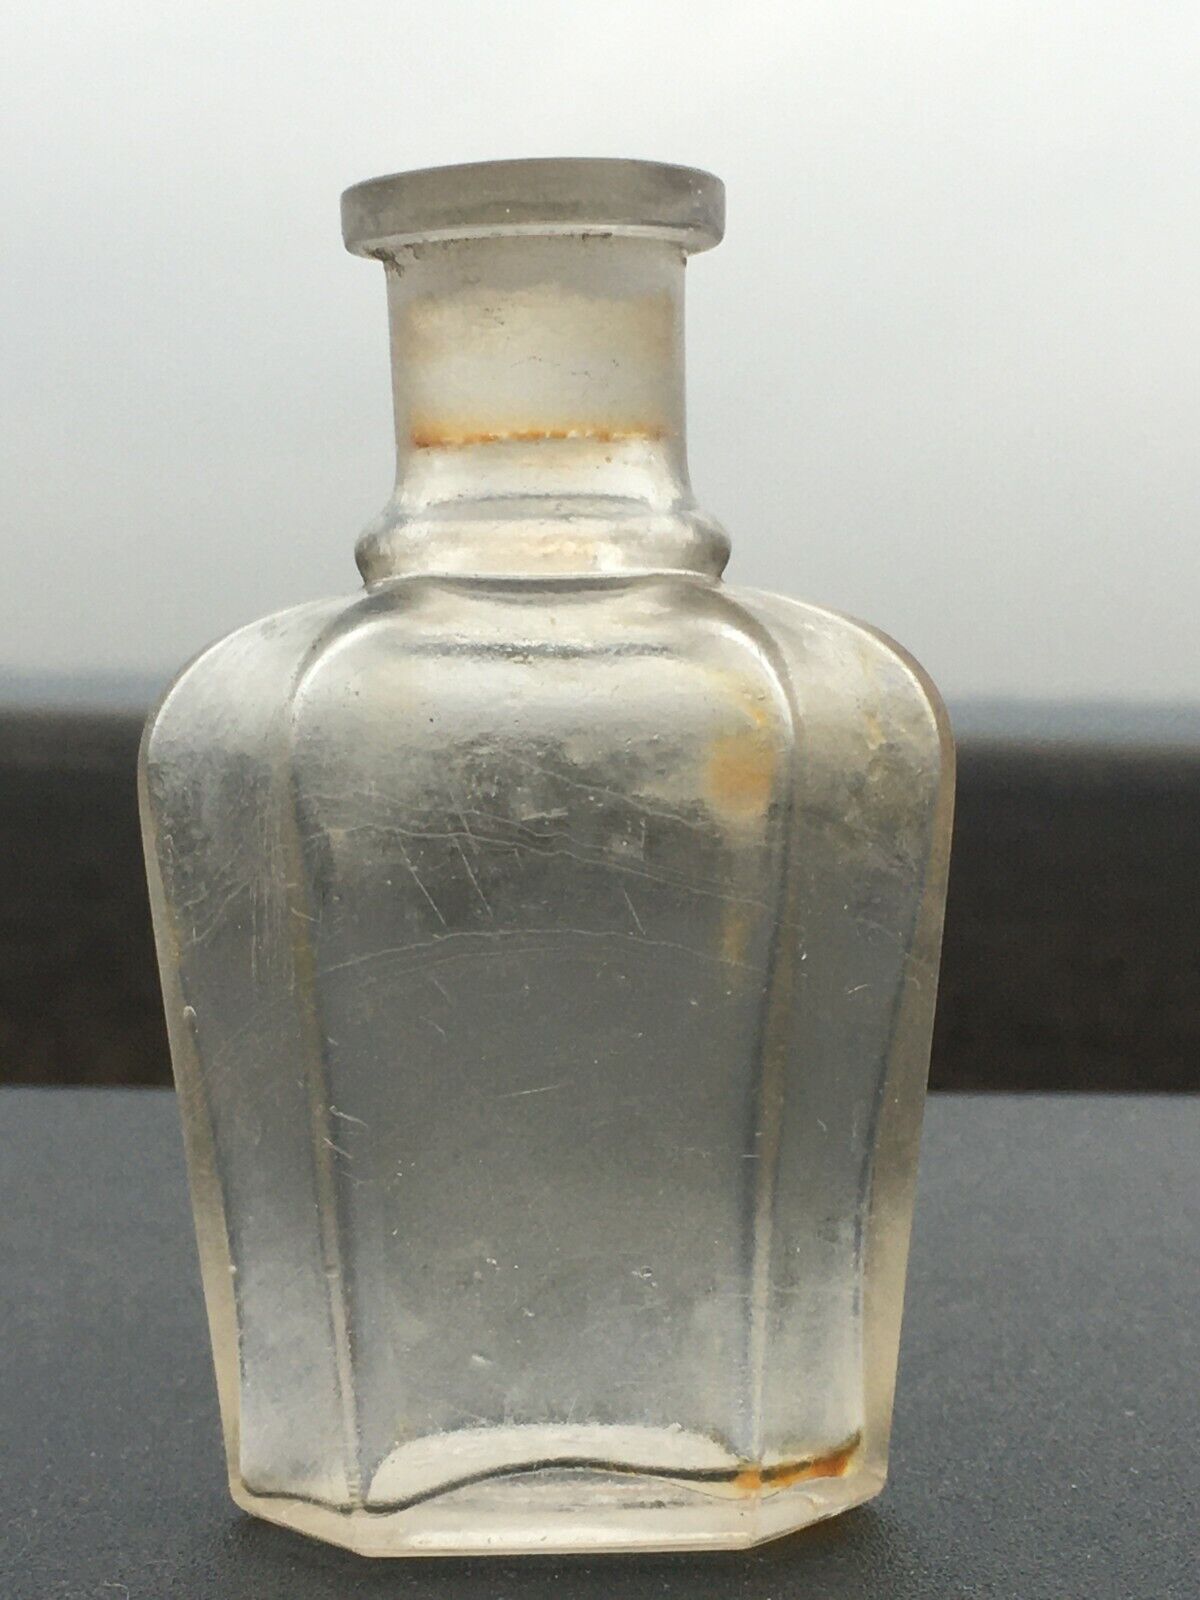 The Royal Bottle of Perfume 19th century 